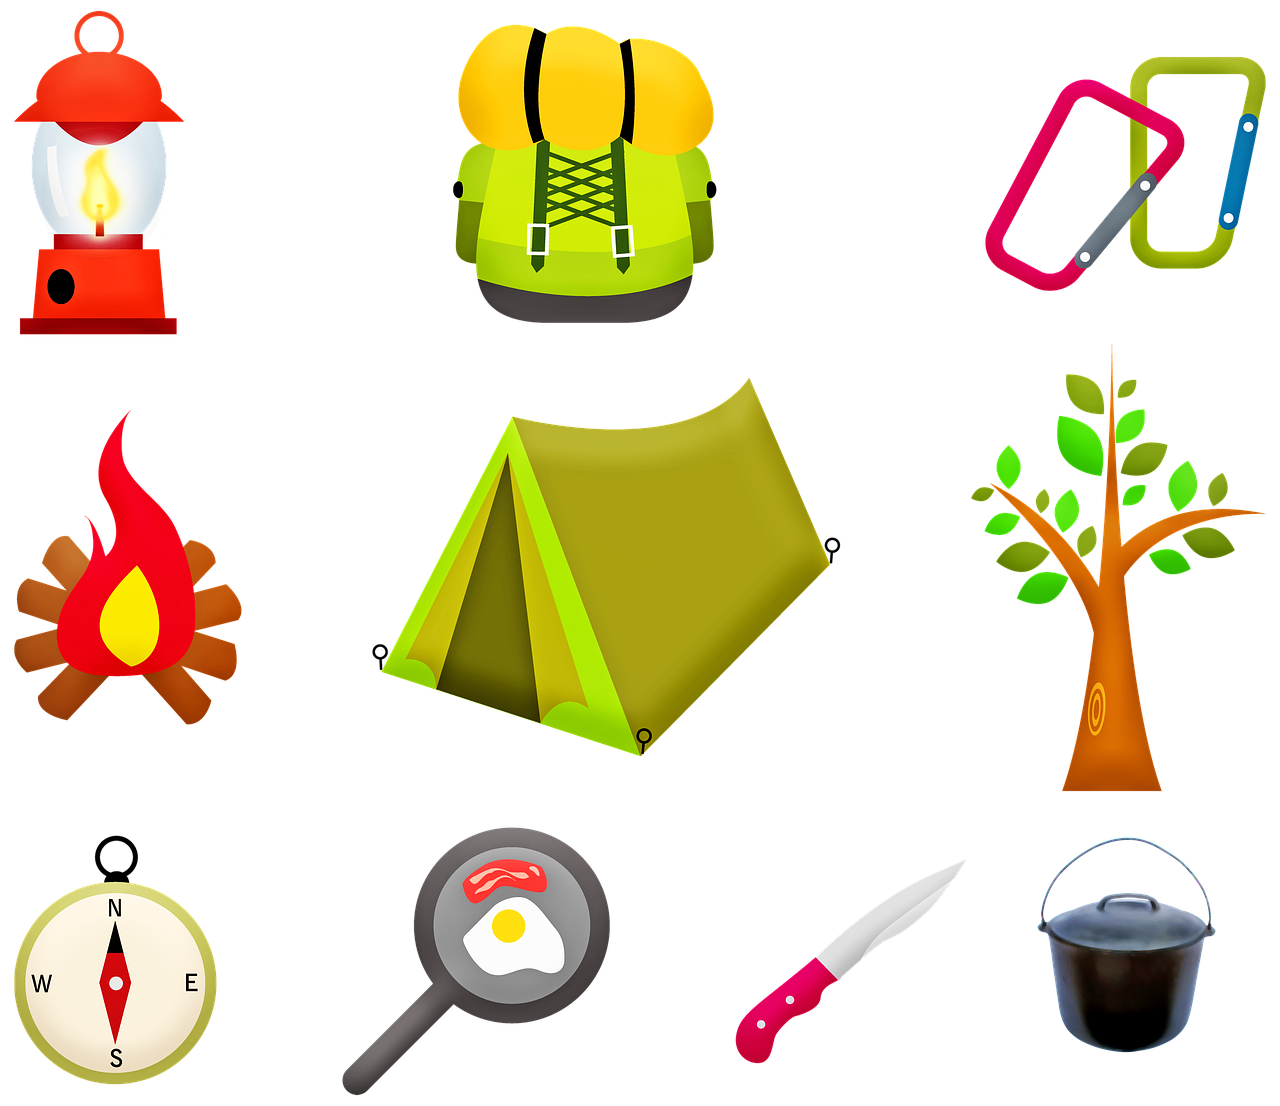 89-400-camping-gear-illustrations-royalty-free-vector-graphics-clip